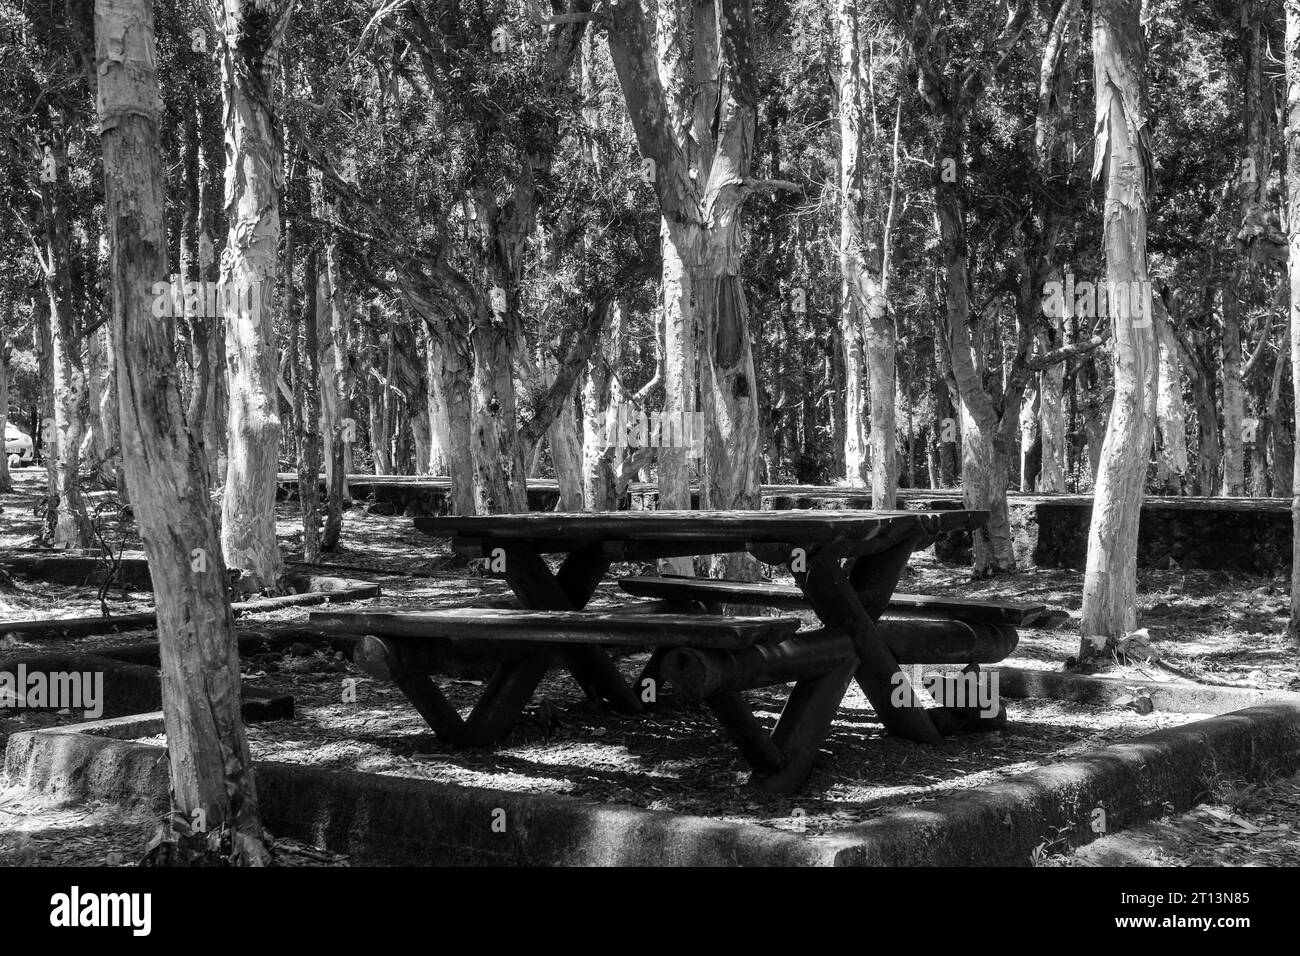 Picnic table with bench among trees in black and white color Stock Photo